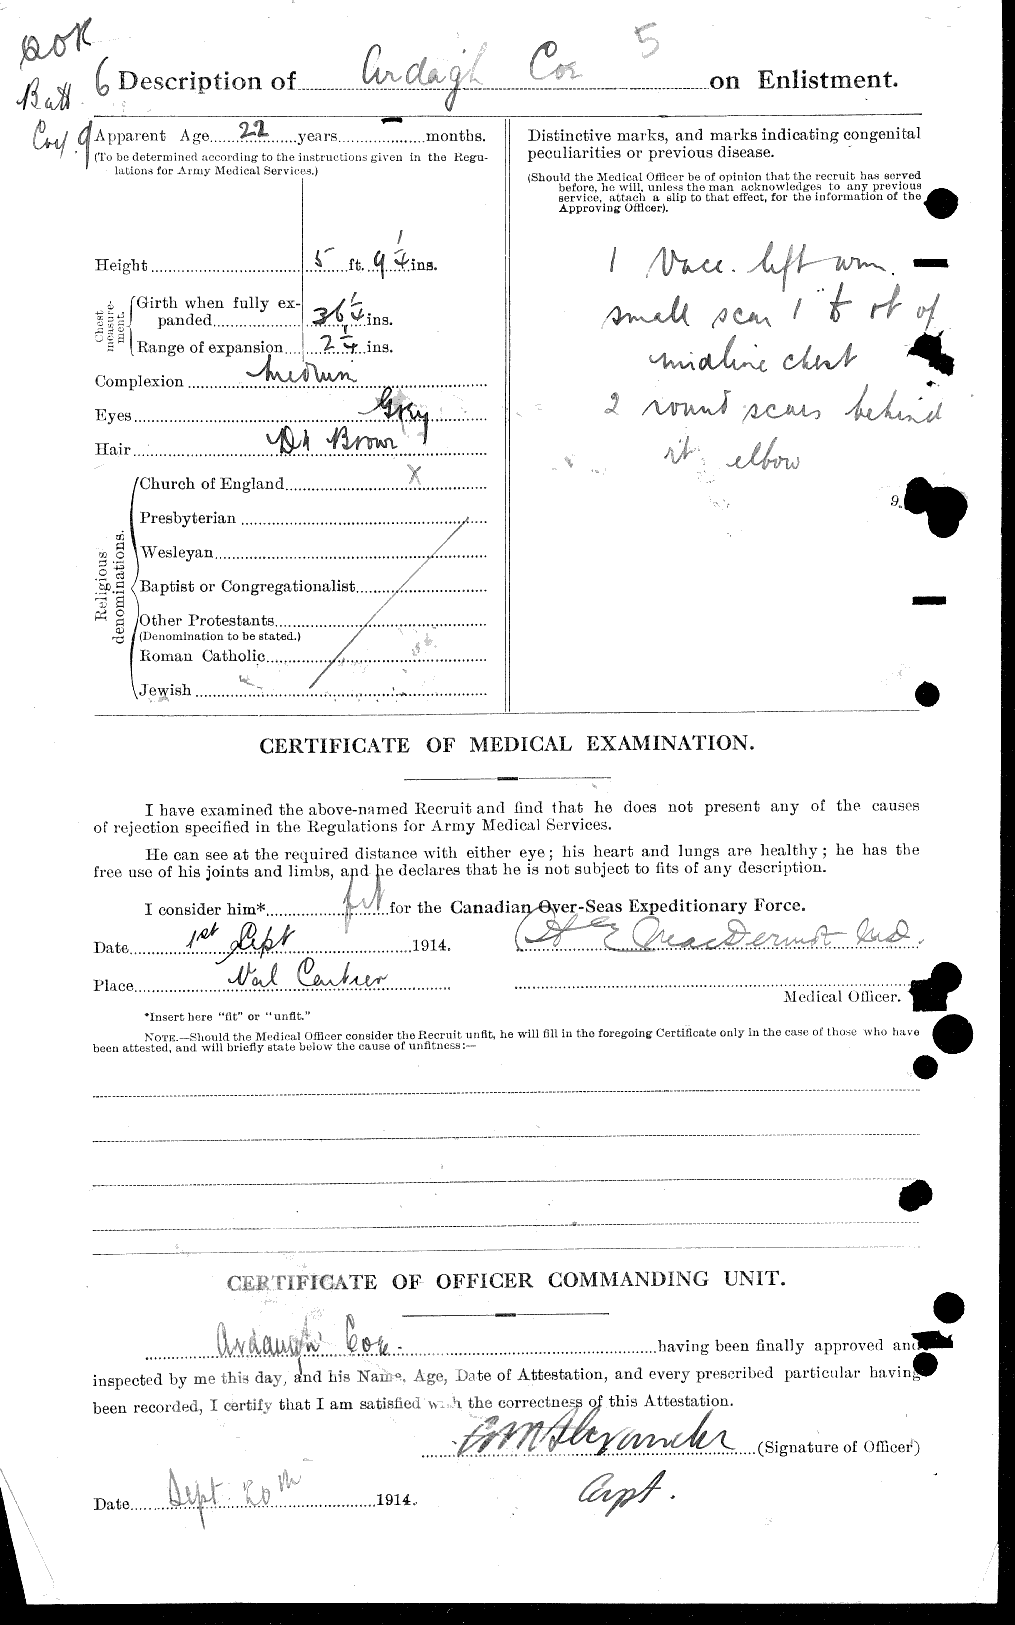 Personnel Records of the First World War - CEF 026937b